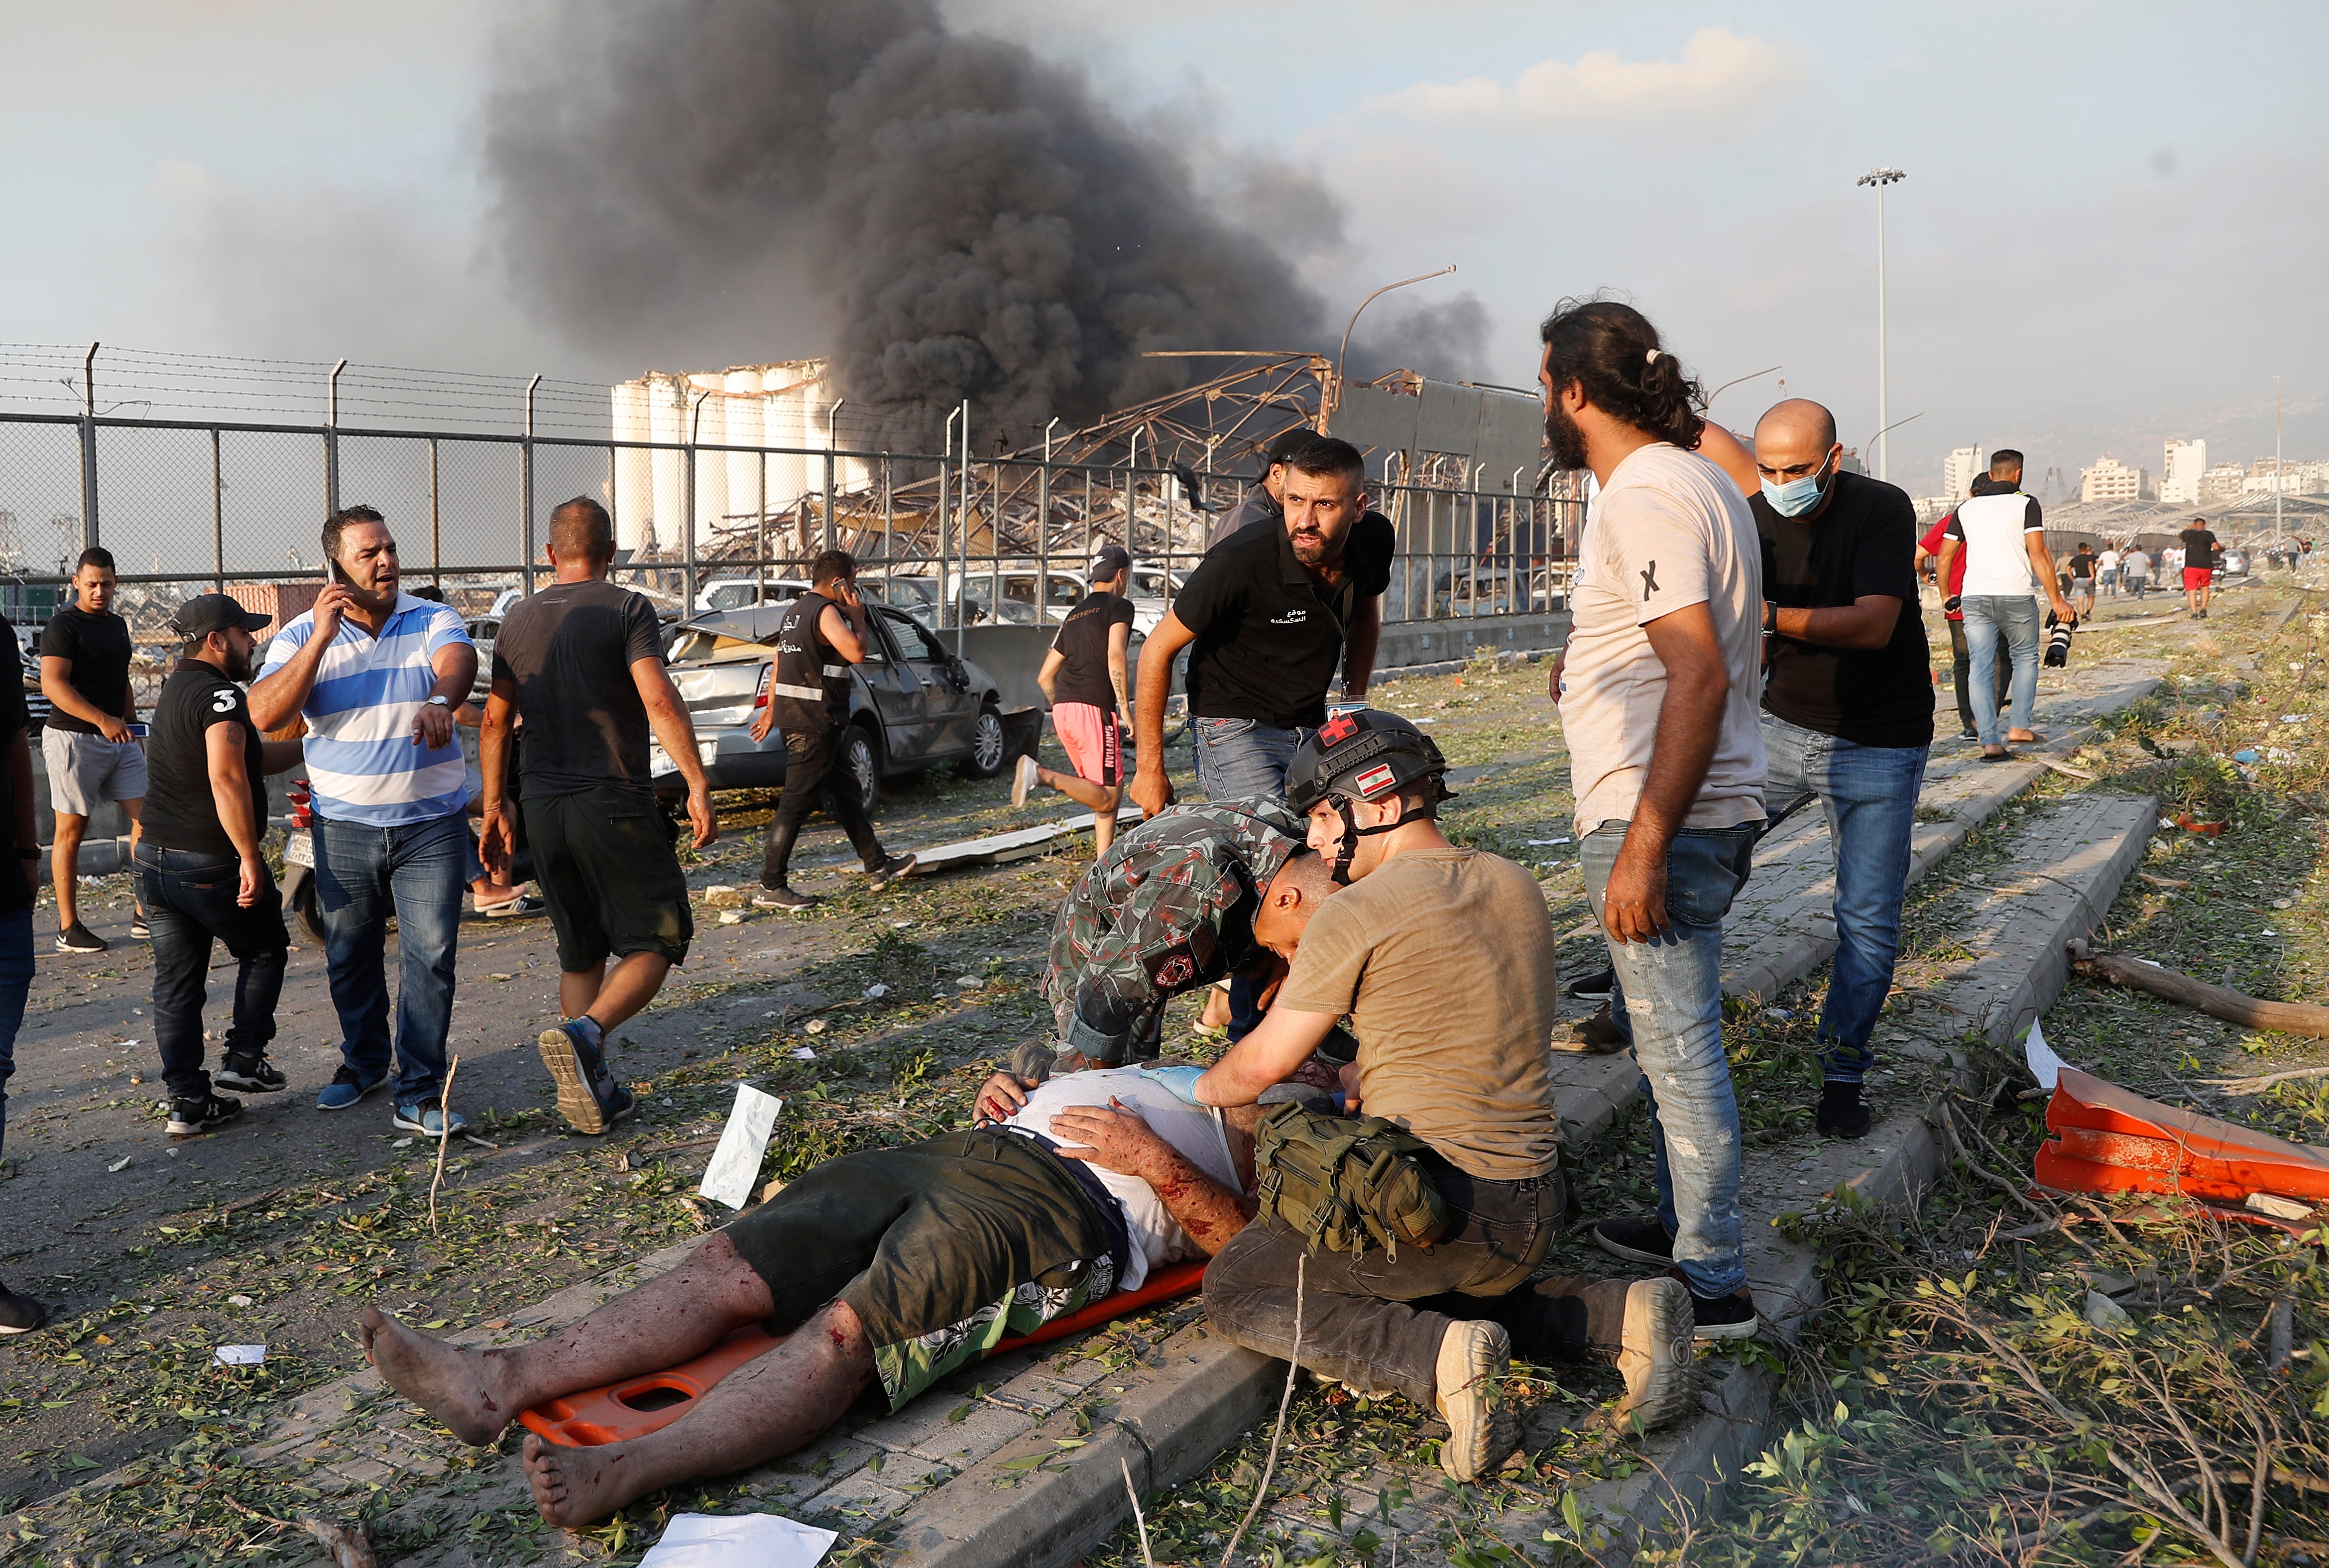 Rescue workers help an injured man at the explosion scene. Massive explosions rocked downtown Beirut, Lebanon on Tuesday, flattening much of the port, damaging buildings and blowing out windows and doors as a giant mushroom cloud rose above the capital.